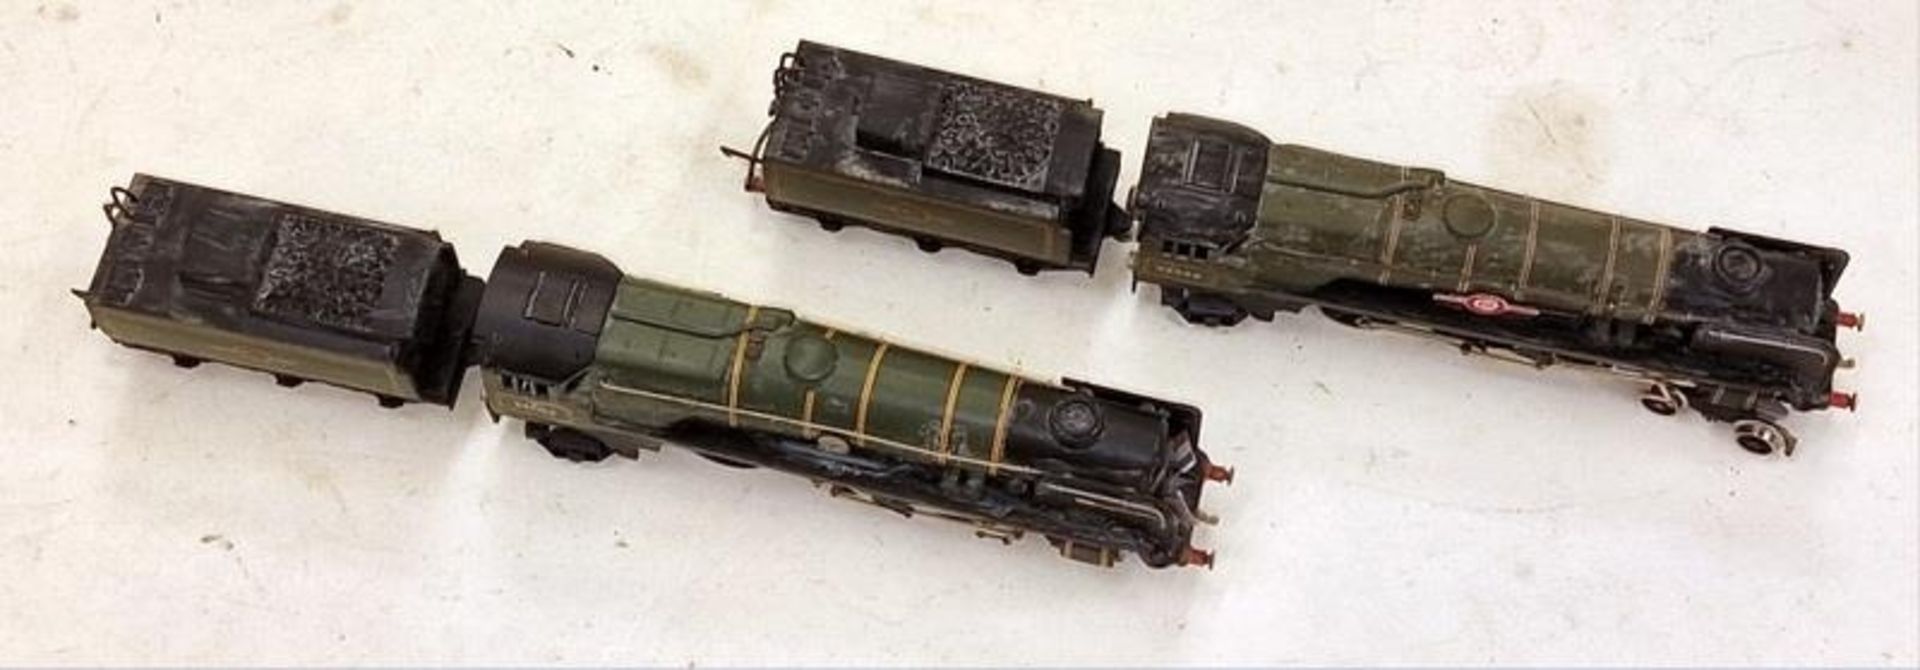 Two OO Gauge locomotives and tenders to include British Railways Sir Keith Park 34053 and Merchant - Image 2 of 4